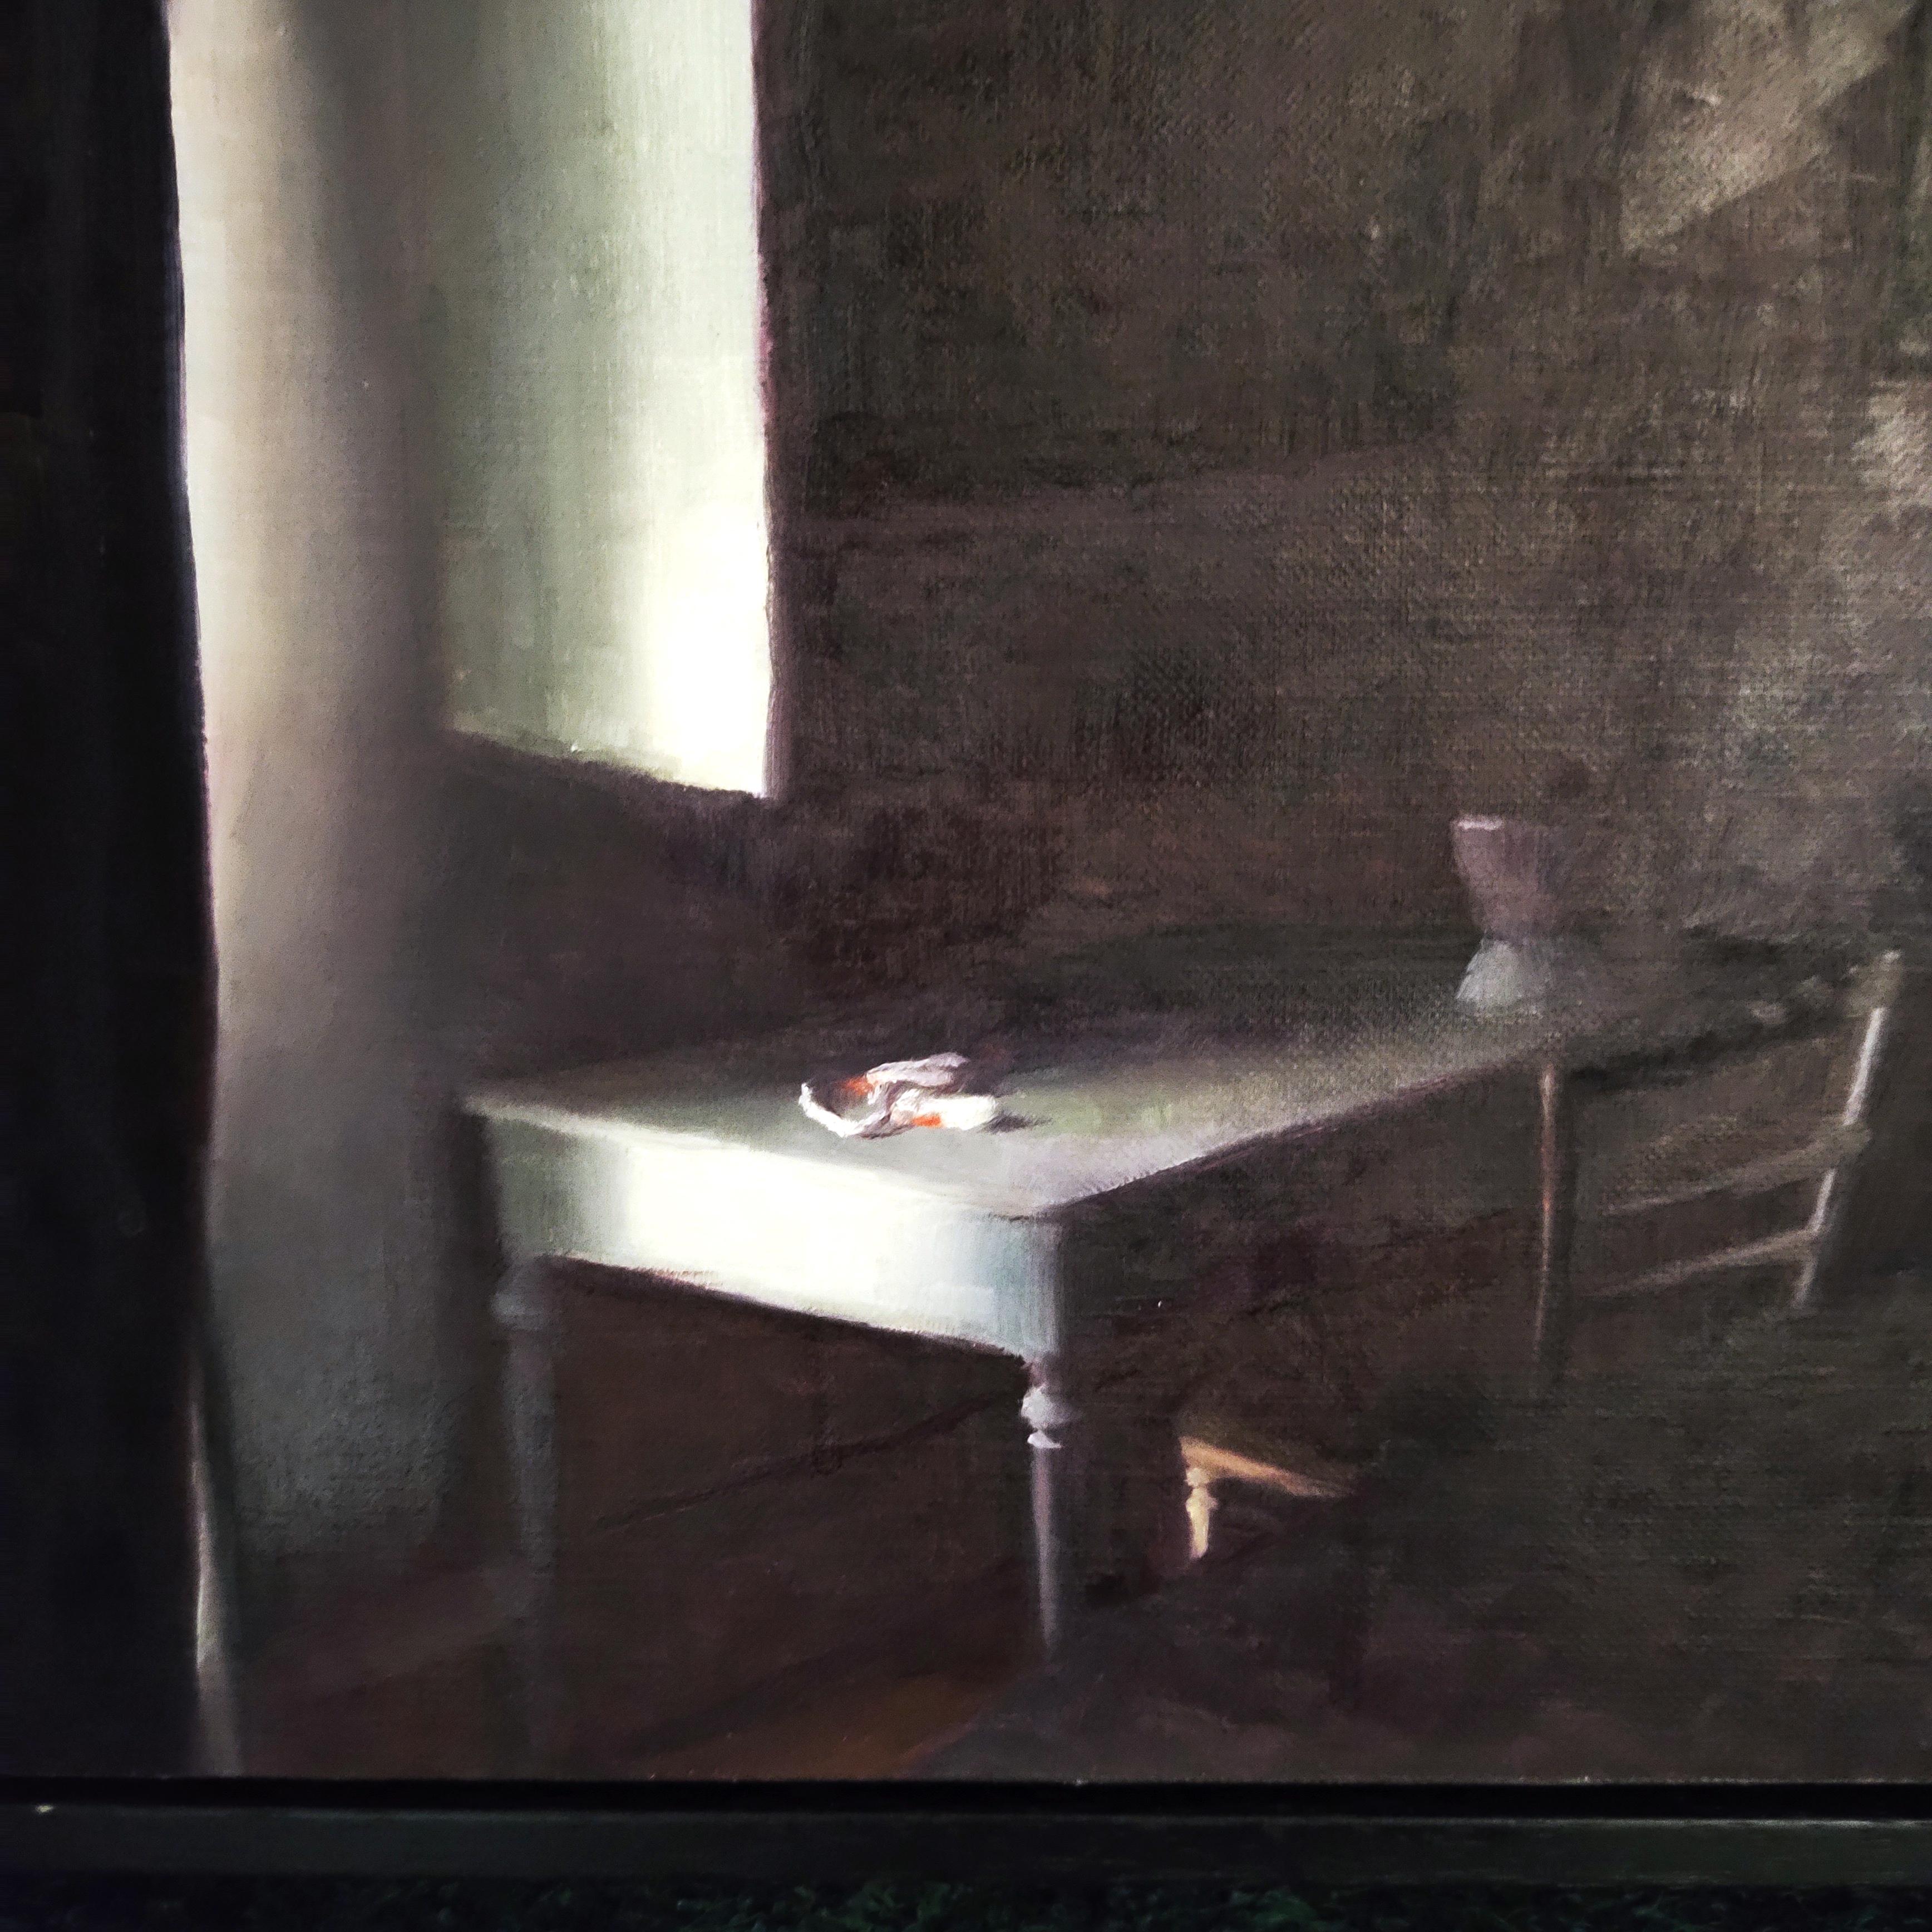 Original Oil on Linen painting, sold framed (framed in block wood frame (painted black) by UK artist Chris Polunin. 
This piece depicts a dark bedroom interior, dimly lit from a side window, highlighting a desk and chair in the spartan room. Deeply